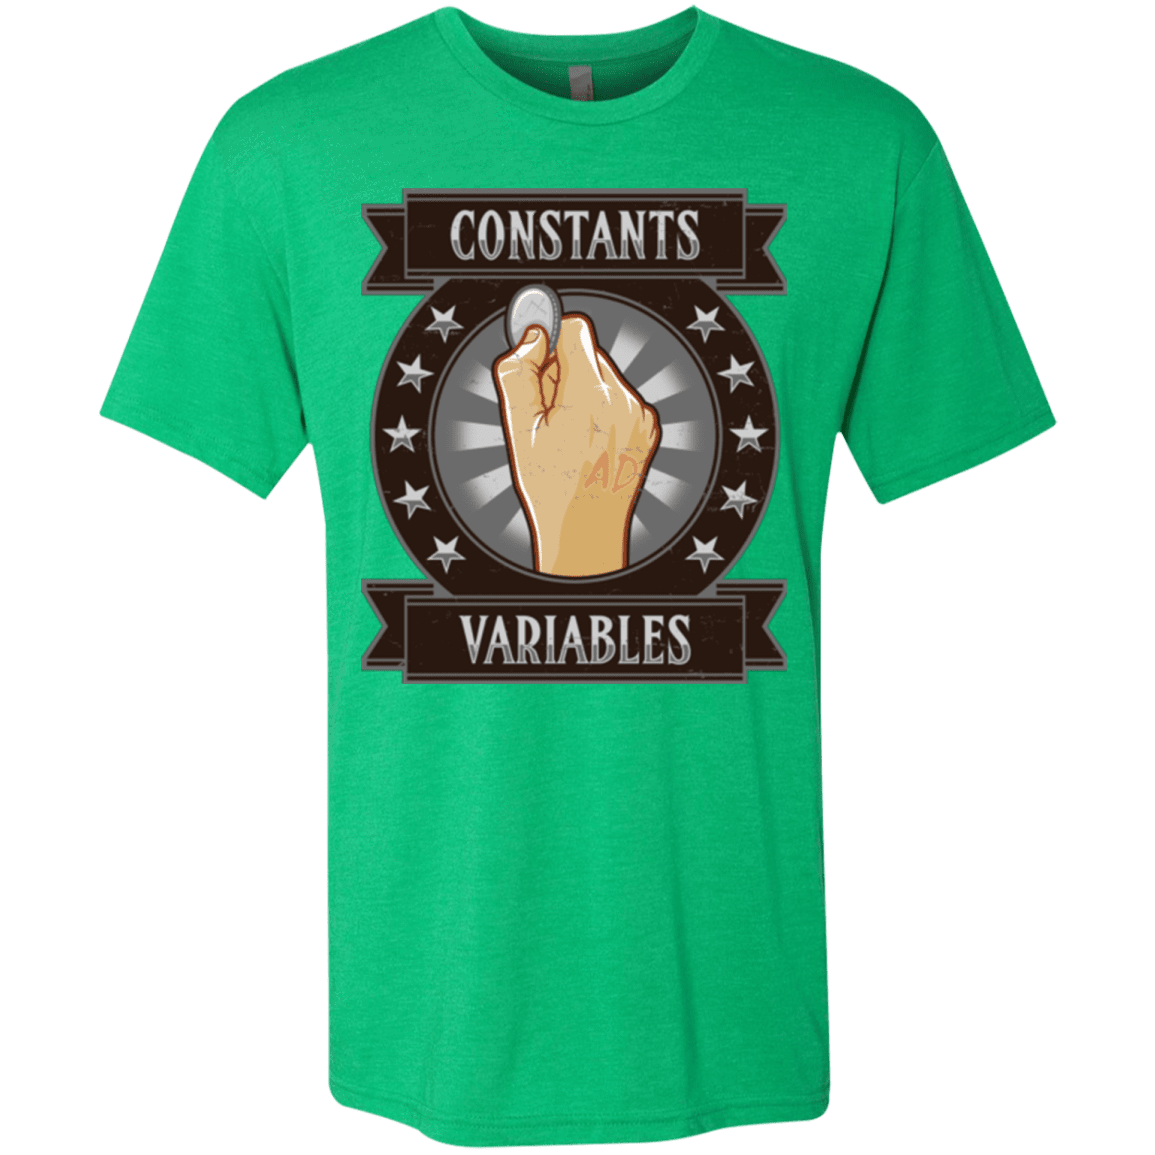 T-Shirts Envy / Small CONSTANTS AND VARIABLES Men's Triblend T-Shirt